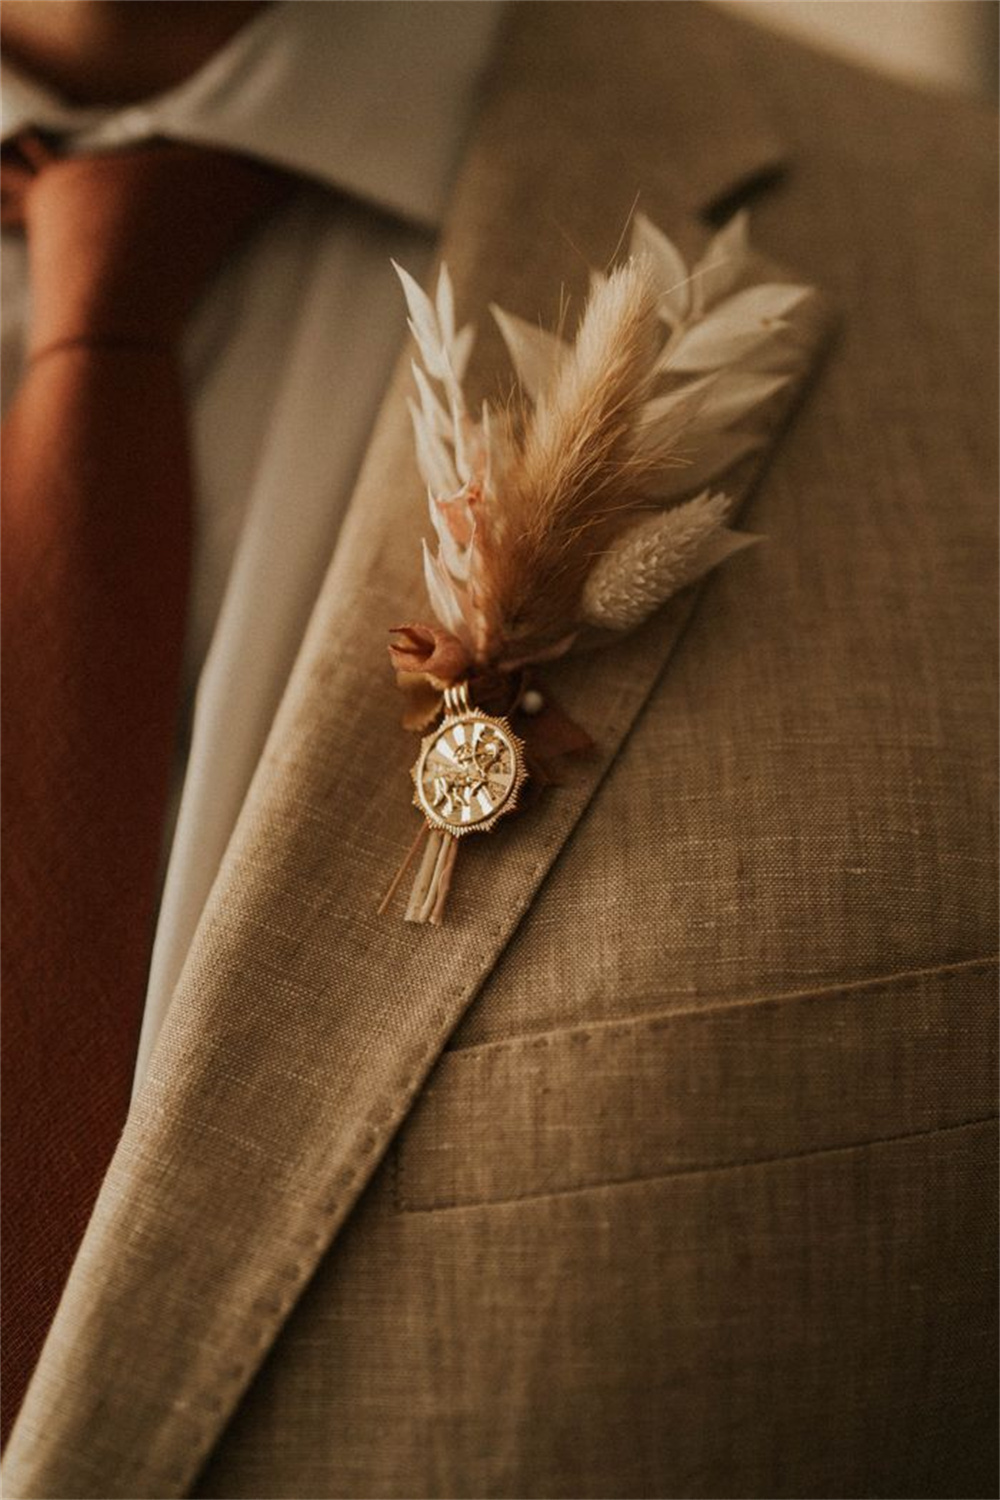 Rustic Wedding Boutonnieres for Country Weddings